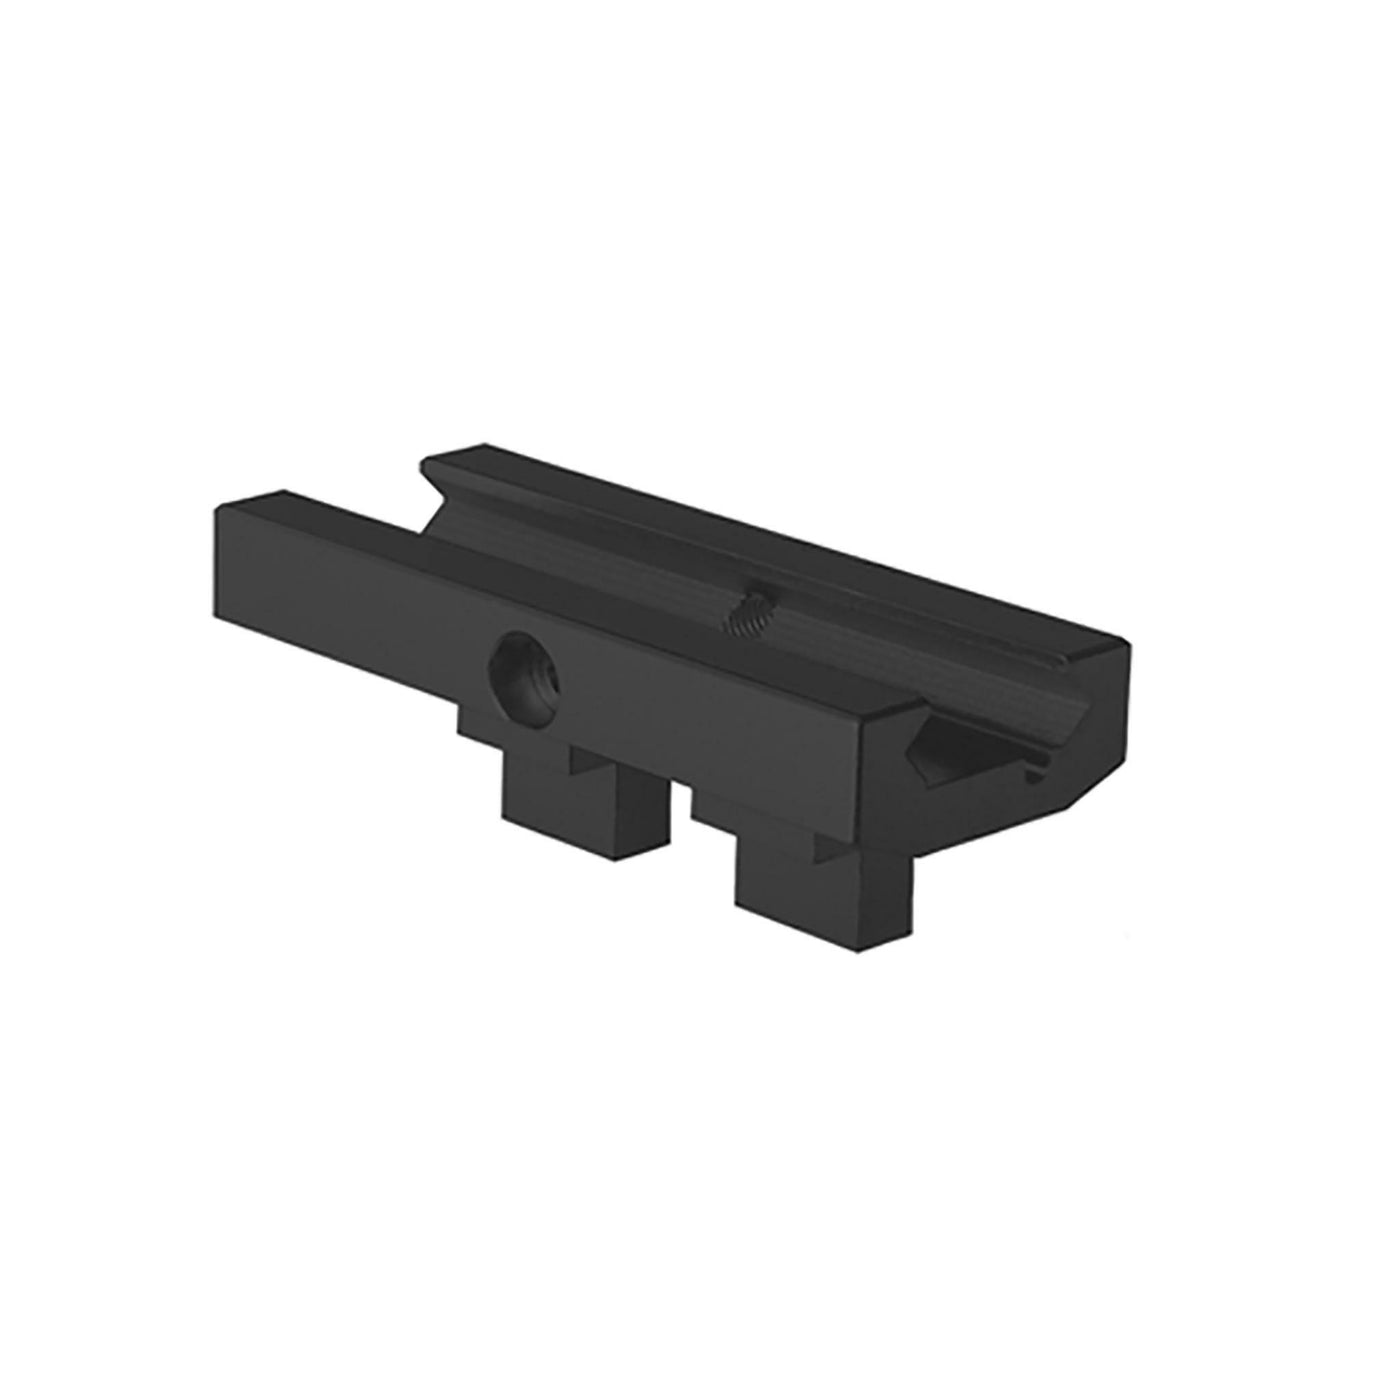 One Piece Pic Rail Adapter